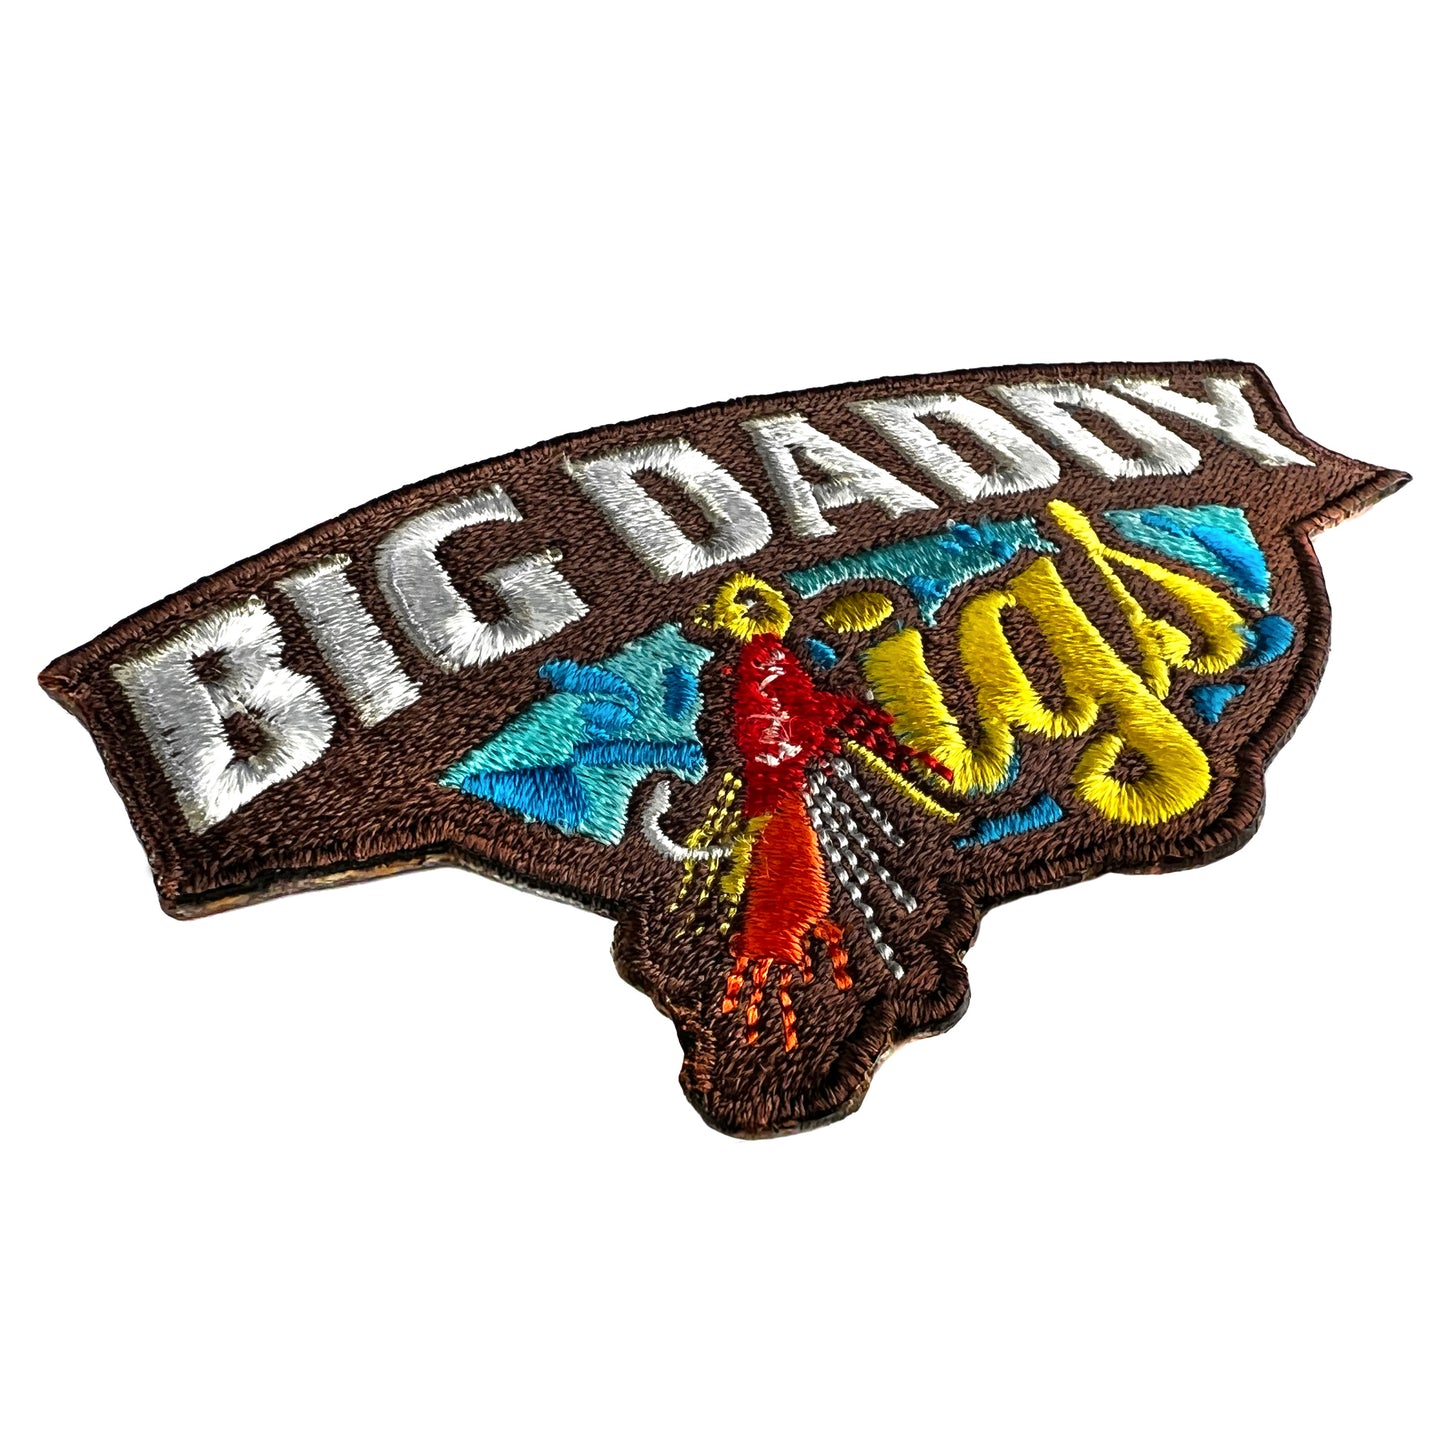 Custom Iron-On Patch- 4 inch - Trophy Depot